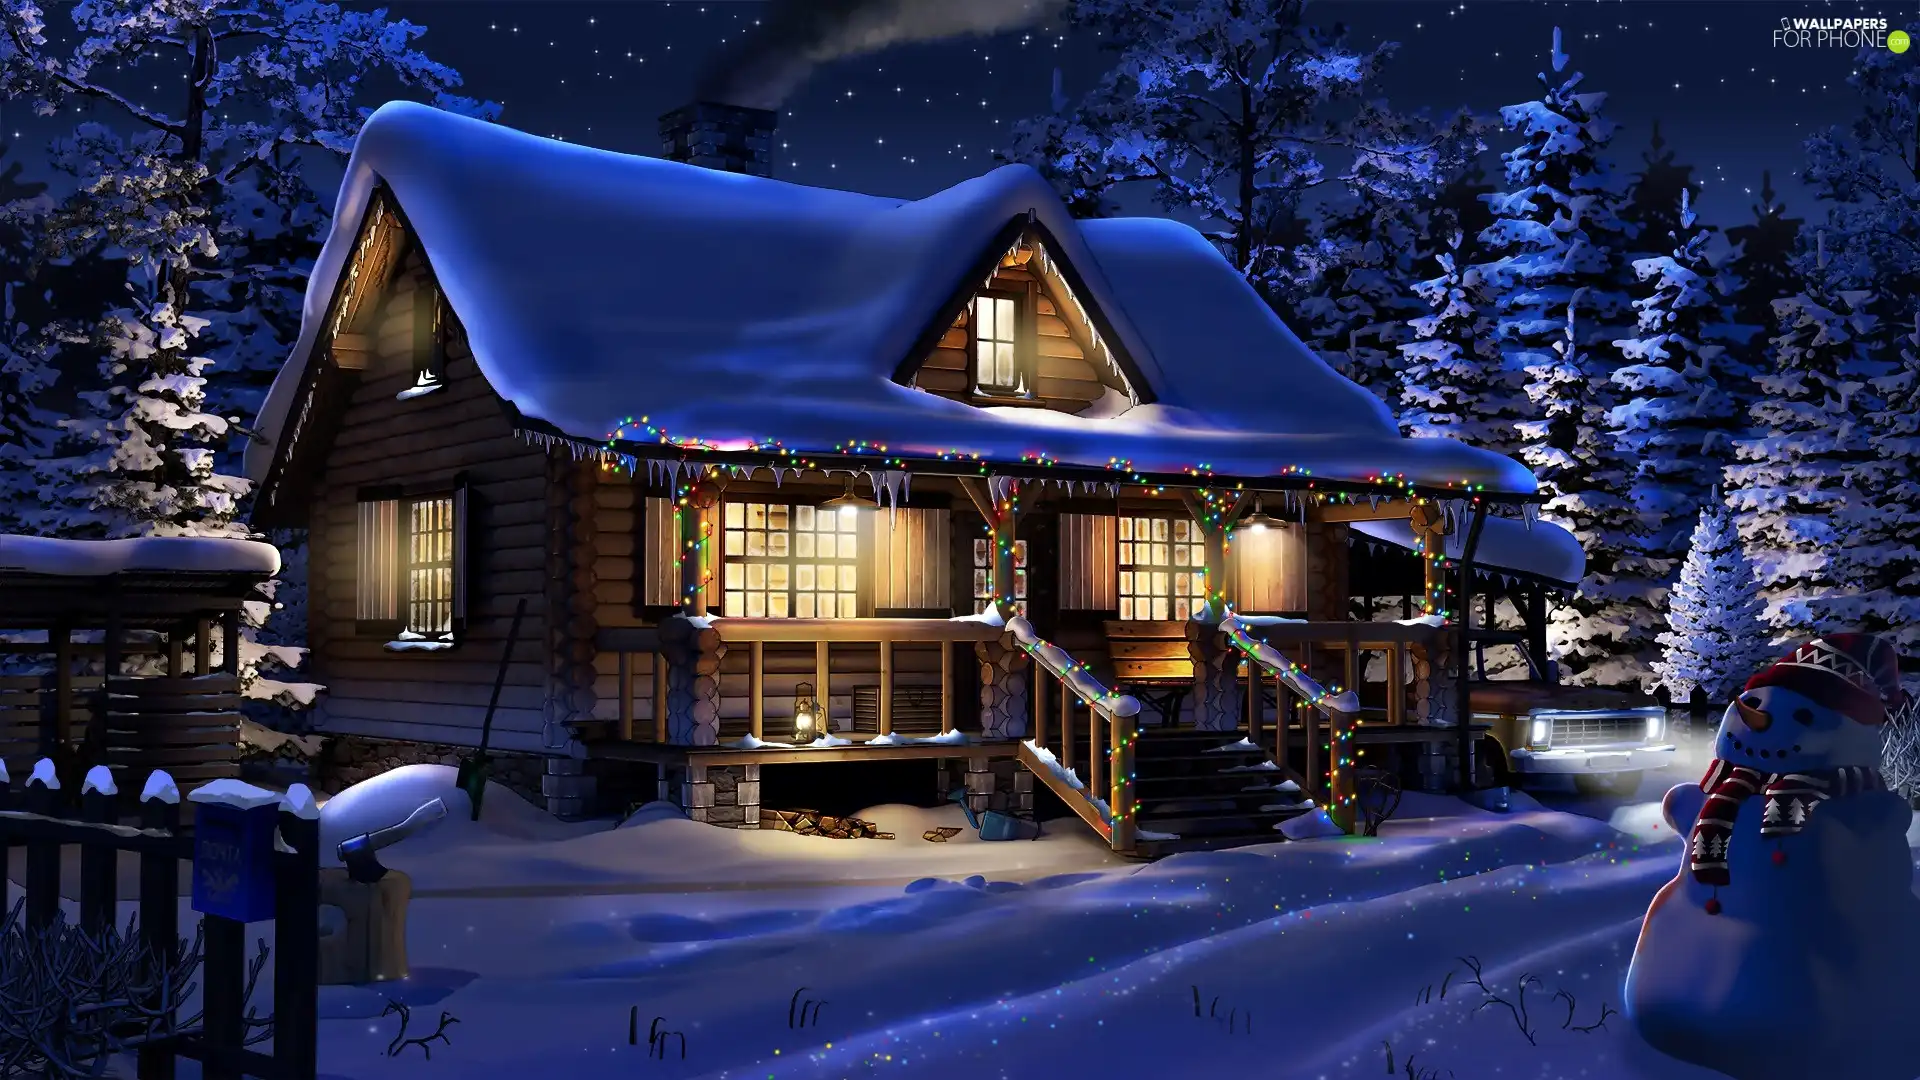 house, festively decorated, Snowman, snow, viewes, Floodlit, winter, trees